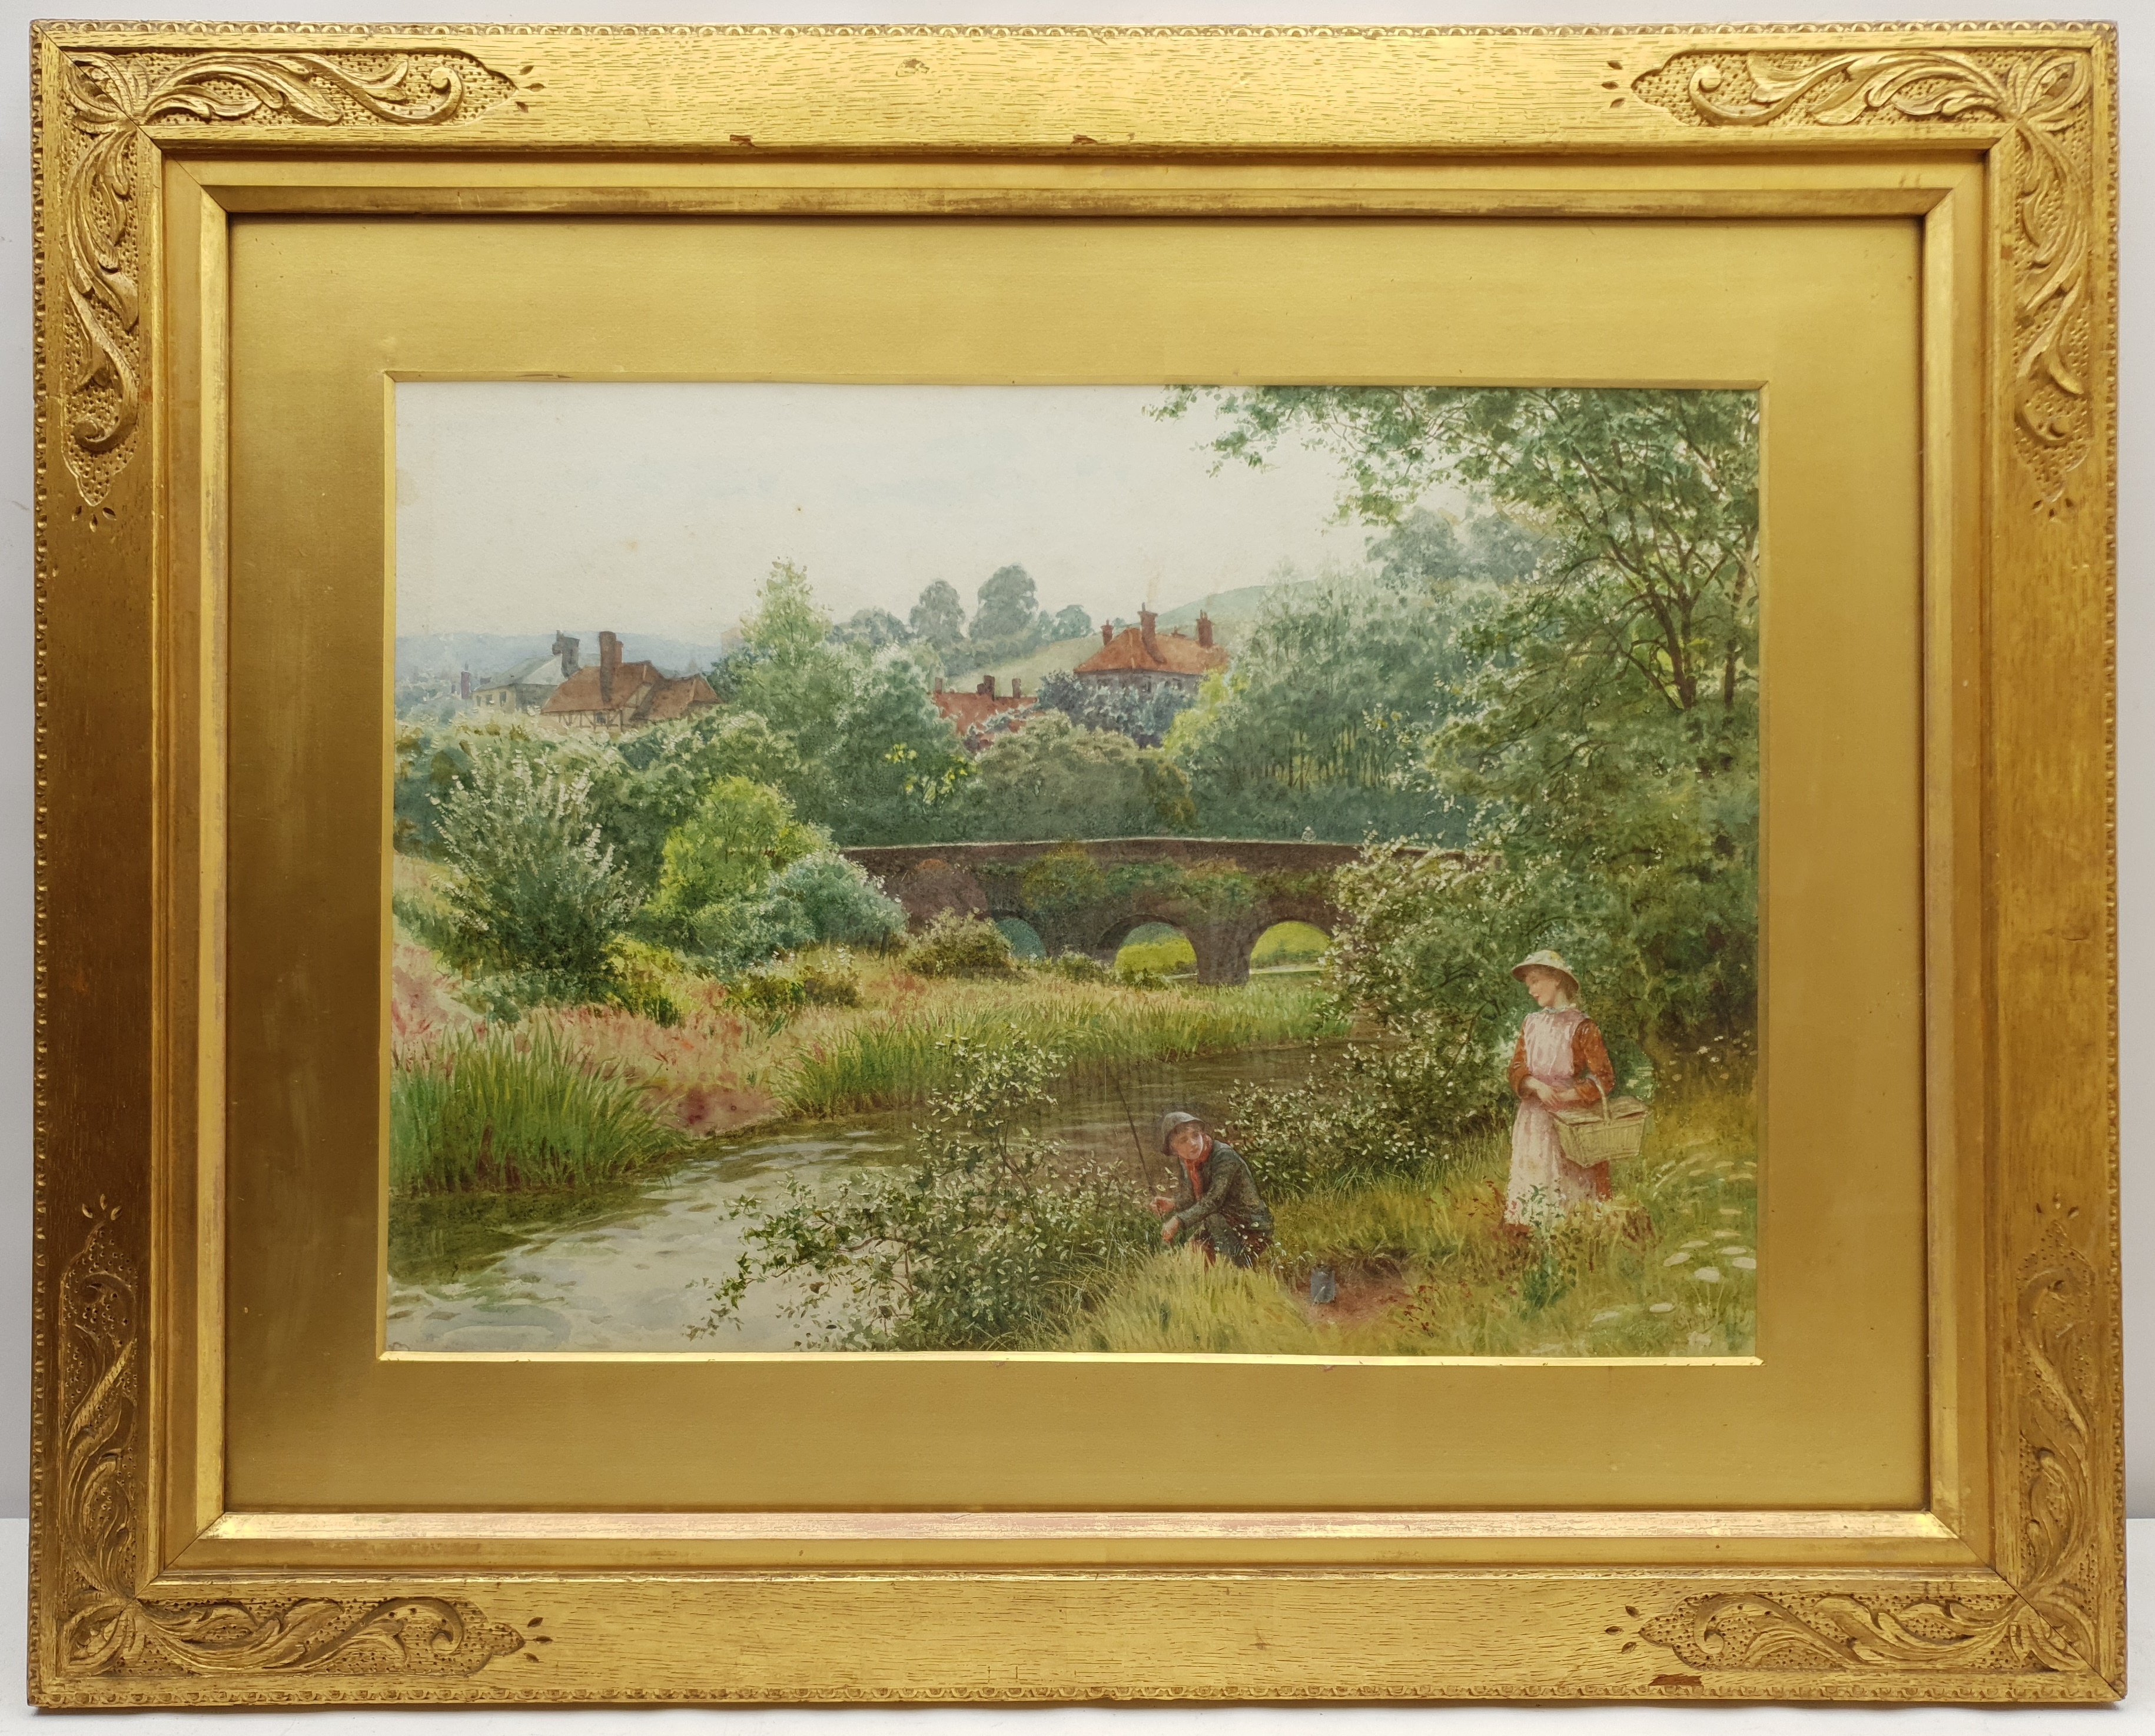 Charles Gregory (British 1850-1920): 'A Bright Way Elstead' - Children Fishing - Image 4 of 4